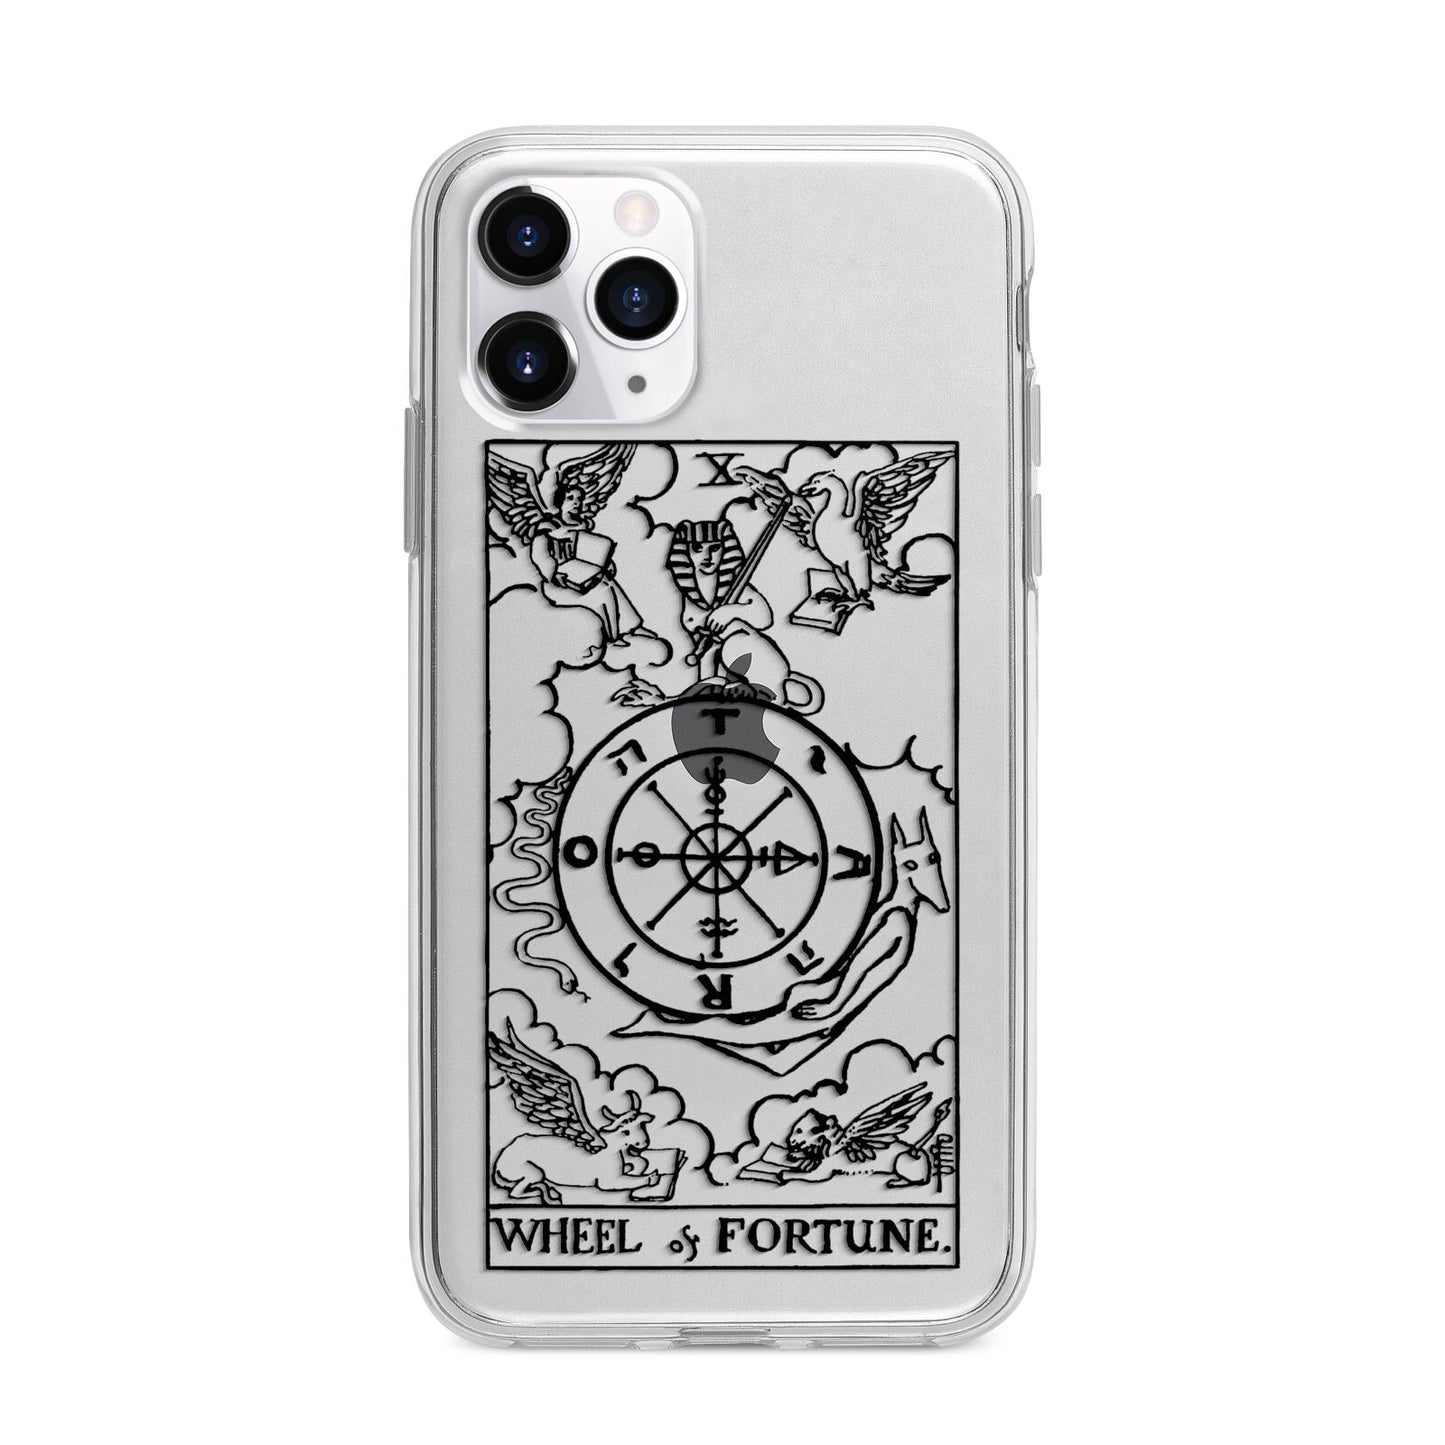 Wheel of Fortune Monochrome Tarot Card Apple iPhone 11 Pro Max in Silver with Bumper Case